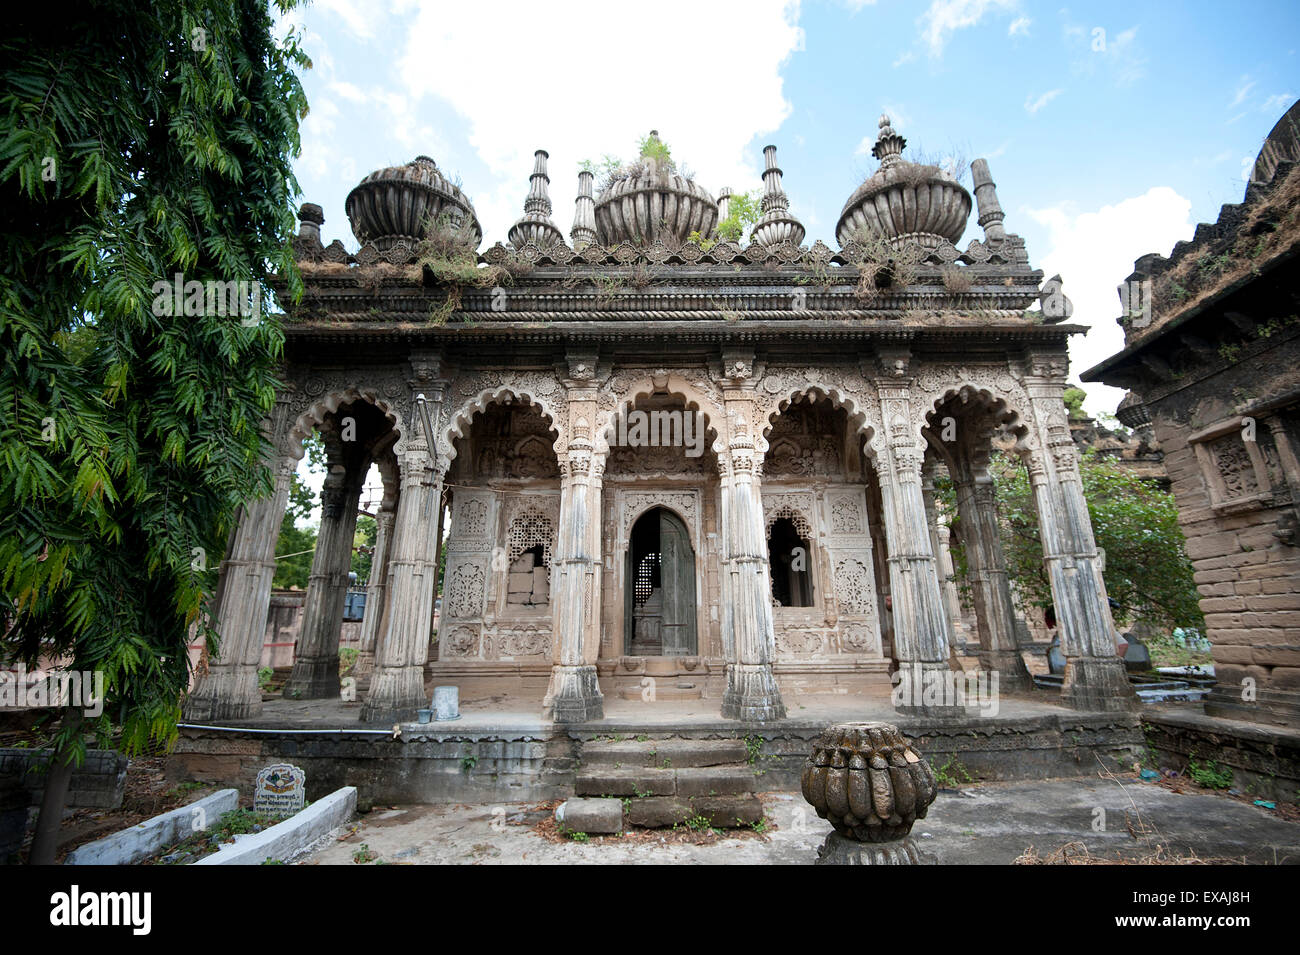 One of the ornately carved 18th century stone mausoleums, Babi dynasty, Tombs of Babi Kings, Junagadh, Gujarat, India Stock Photo